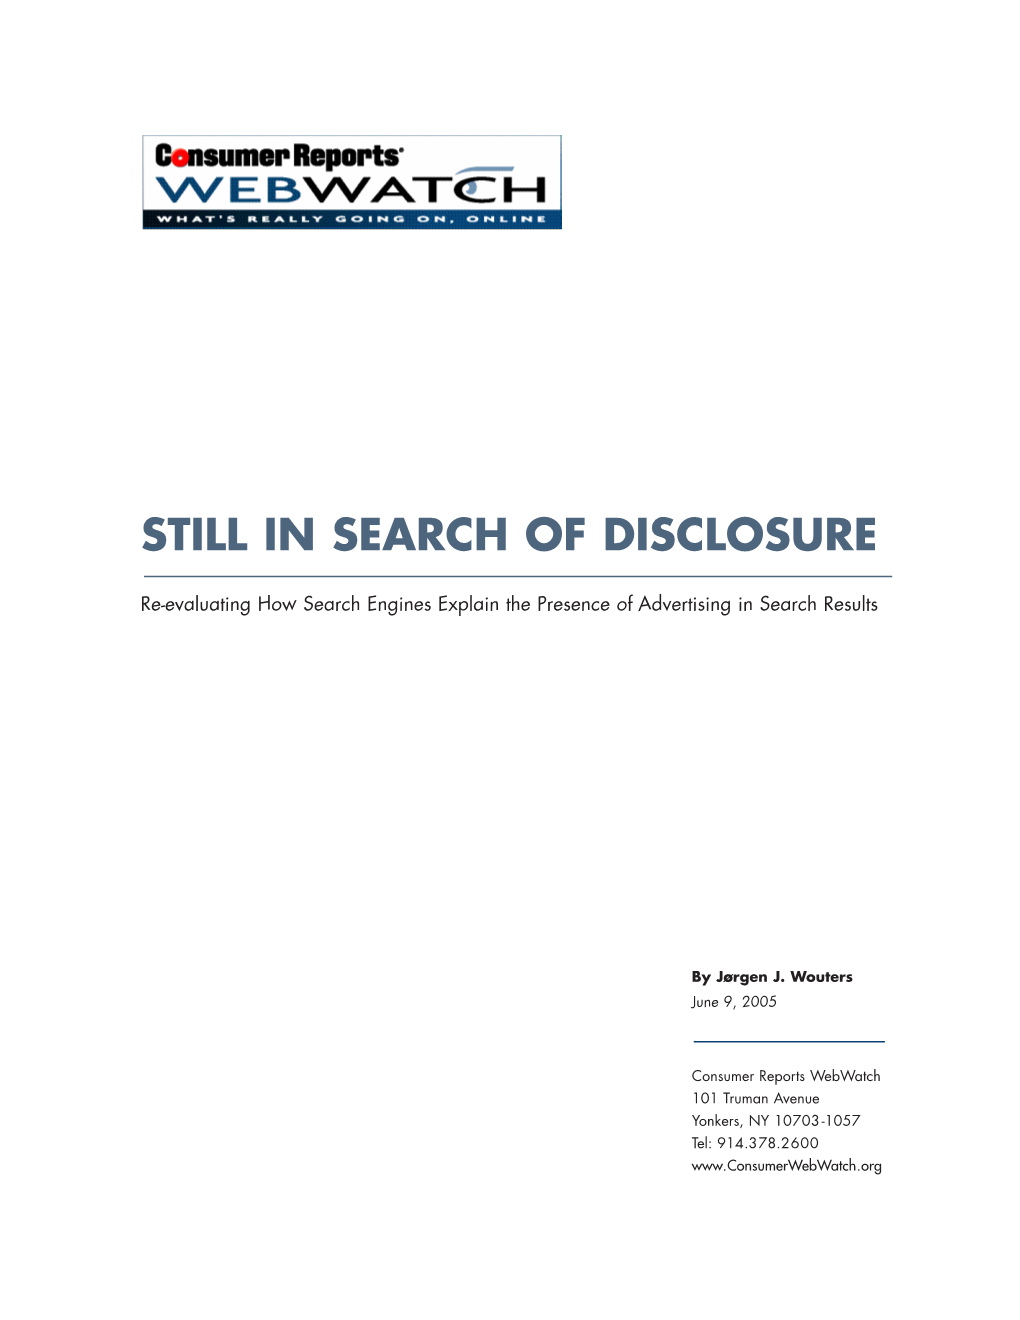 Still in Search of Disclosure